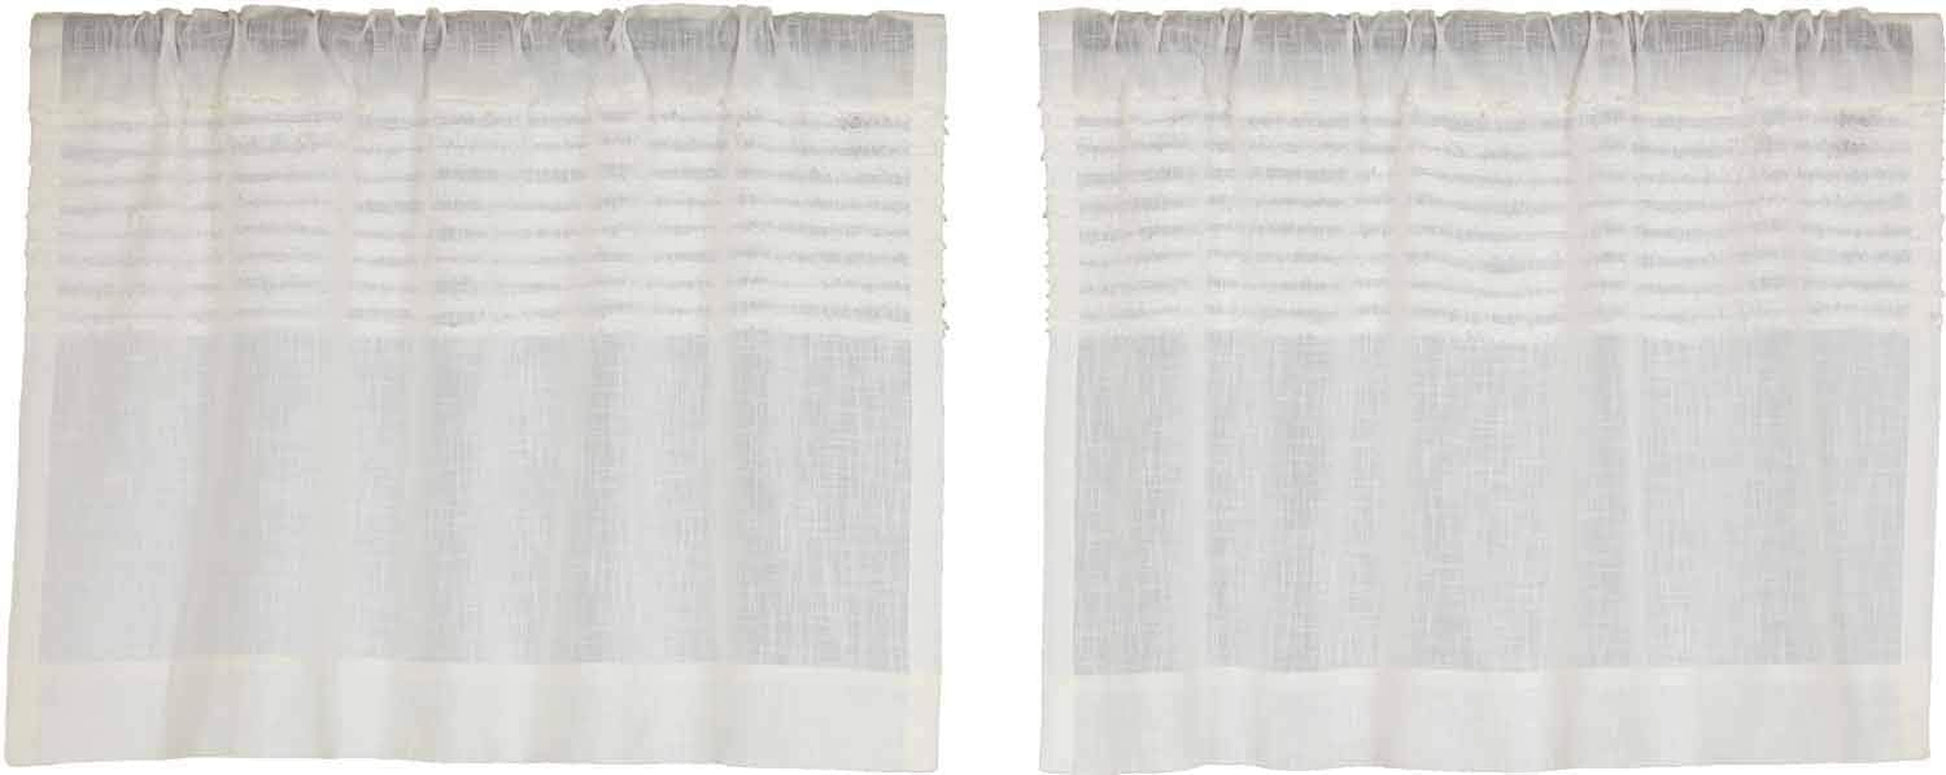 Kathryn Tier Curtains, Set of 2, 24" Long, Ruffled Curtains in a Linen-Look Soft White Cotton Semi-Sheer Fabric, Farmhouse, Cottage, Country Style Sheer Kitchen Café Curtains  Piper Classics   